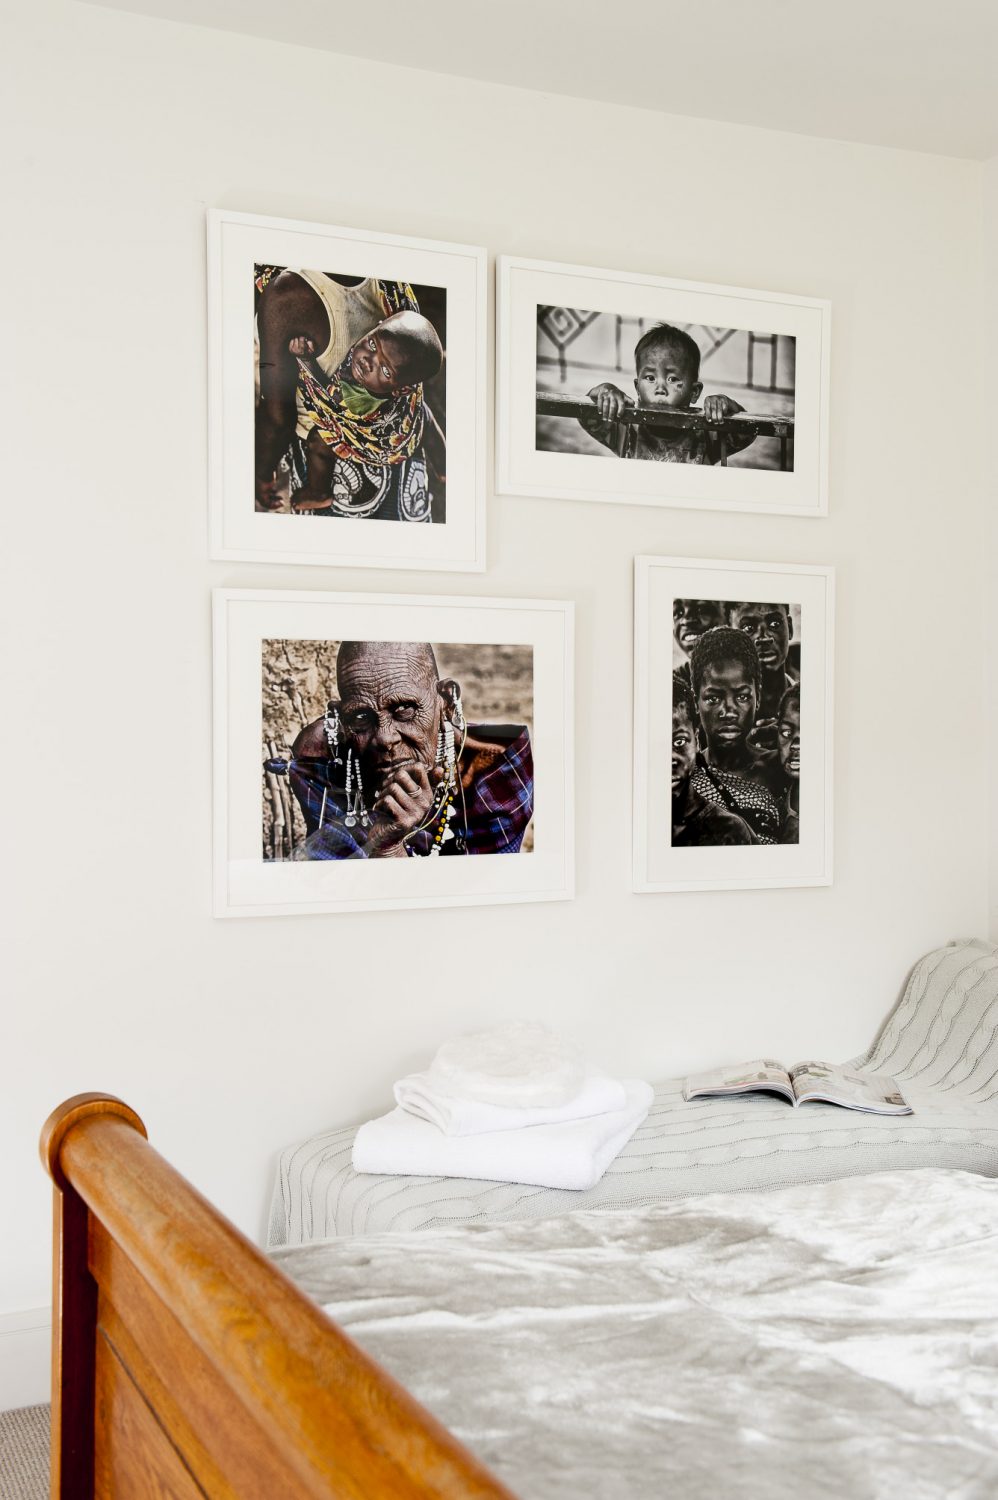 Ali’s photographs, taken on her travels, are on display throughout the house